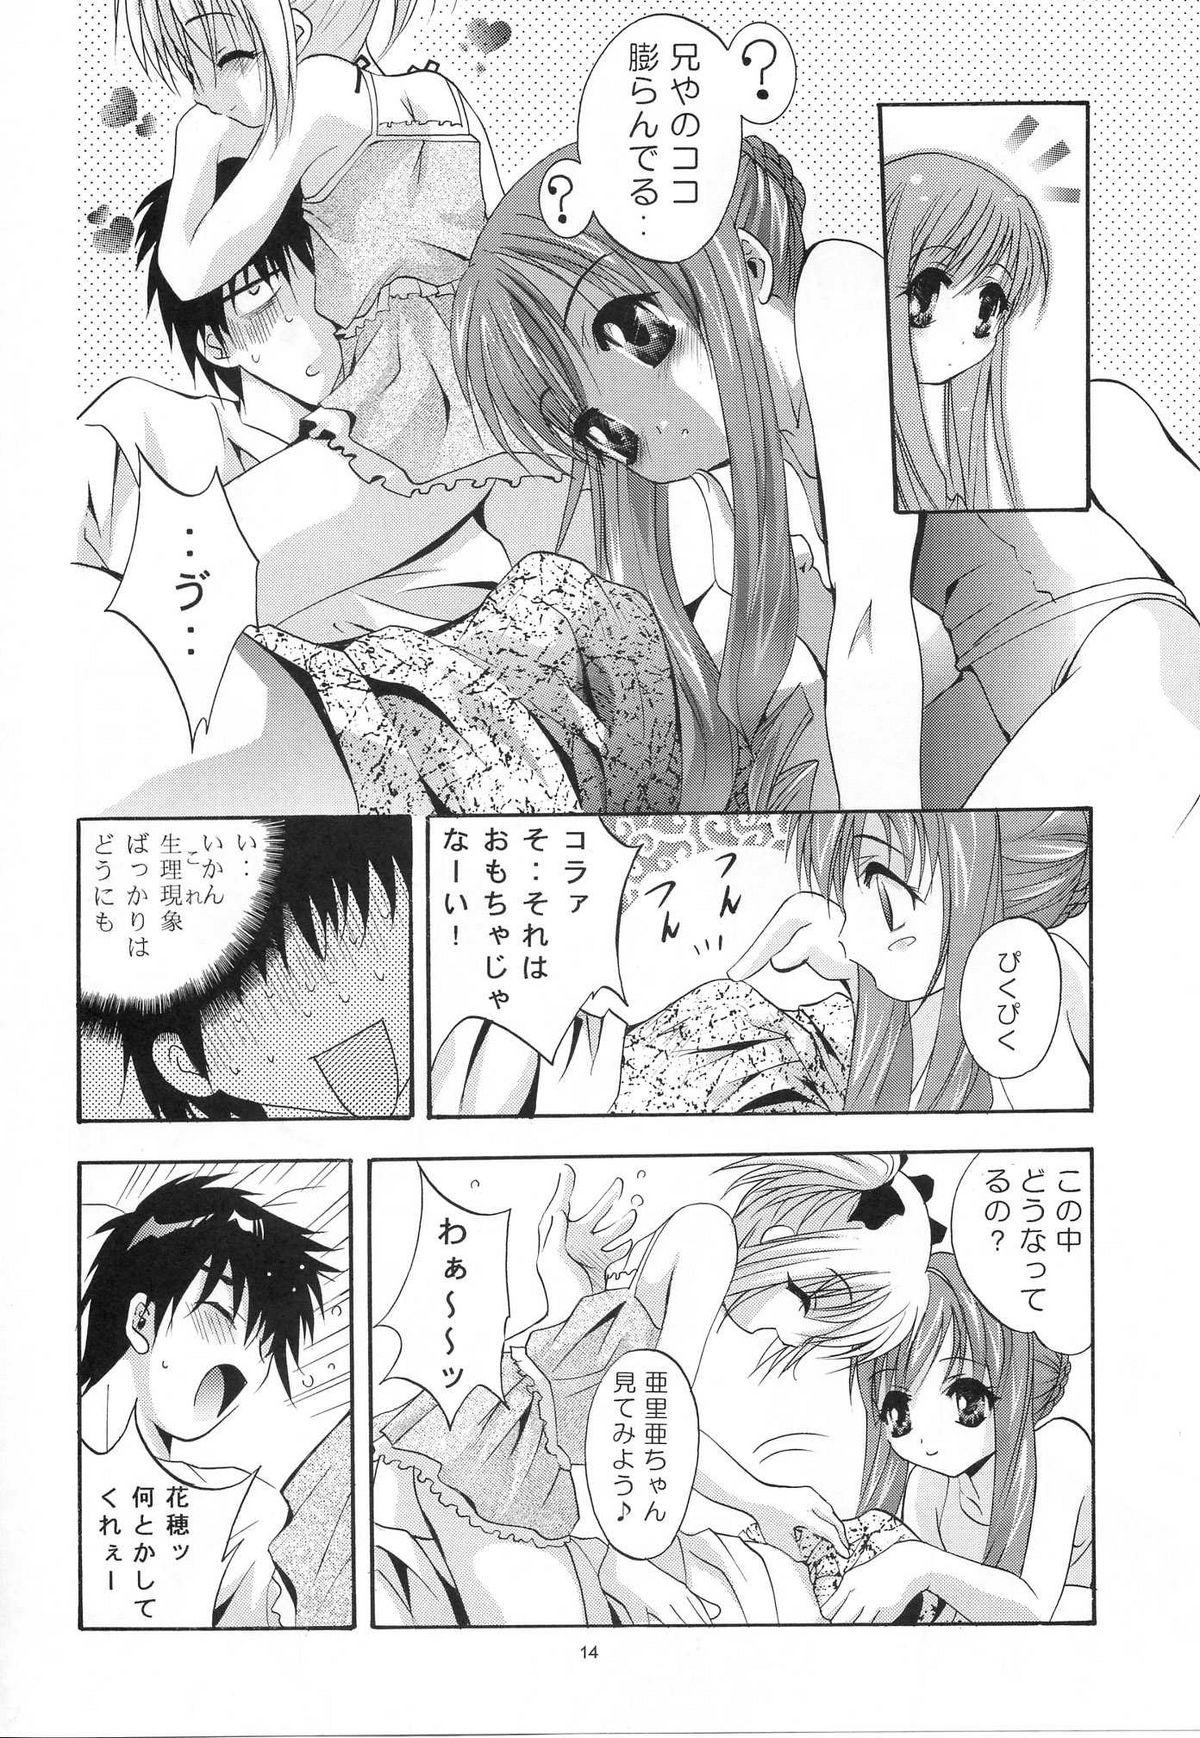 Maledom Mousou Mini Theater 11 - Sister princess Bisex - Page 13